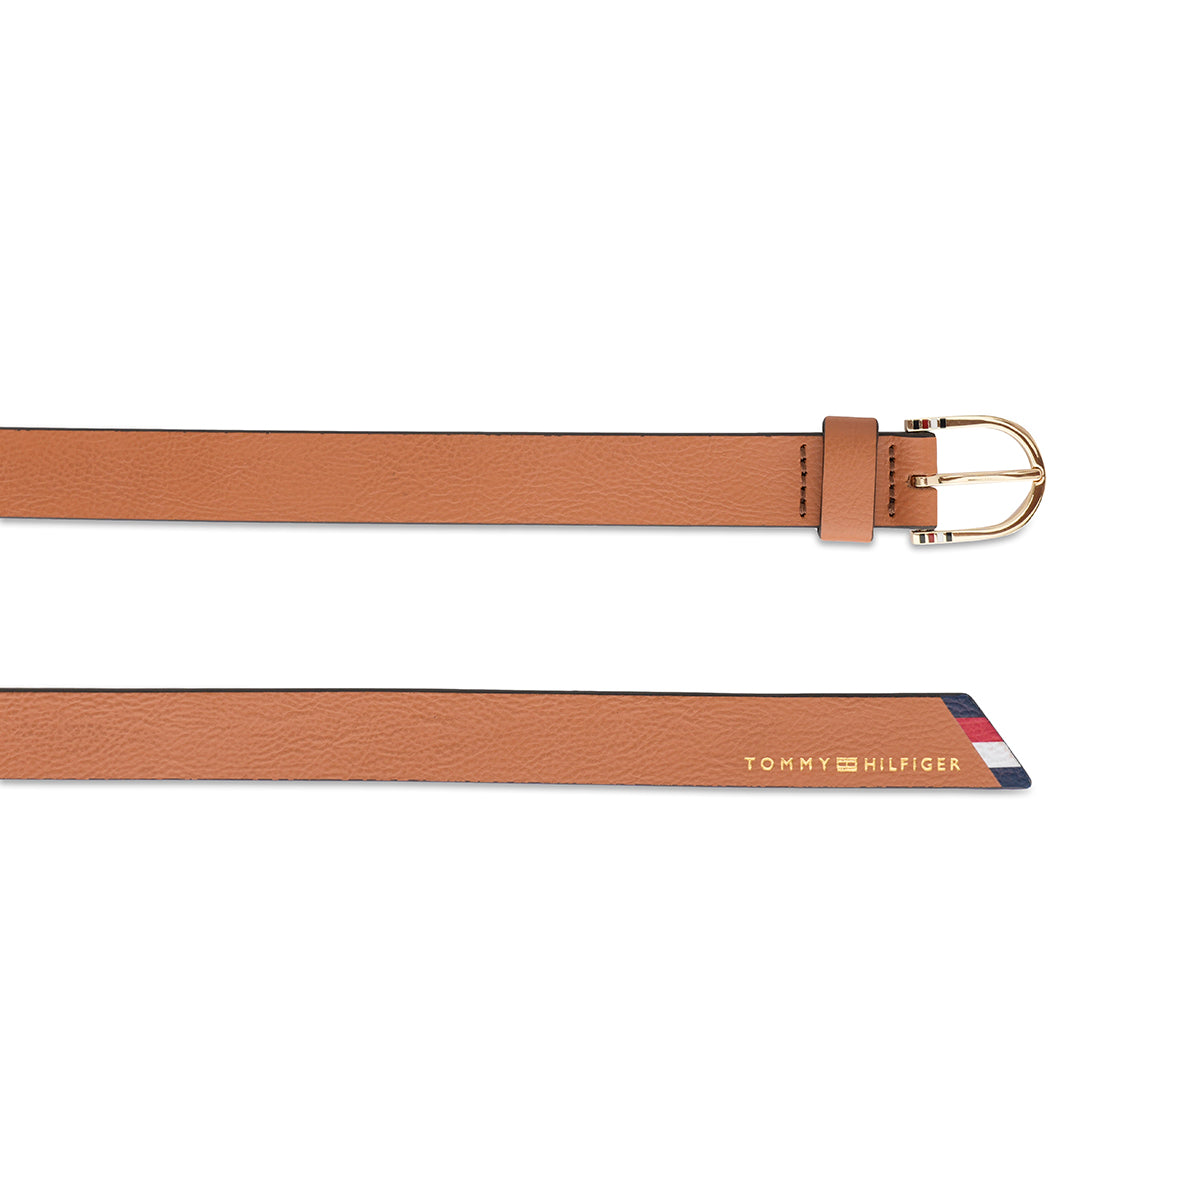 Tommy Hilfiger Small Leather Goods Fuchsia Women's Non Reversible Belt Tan